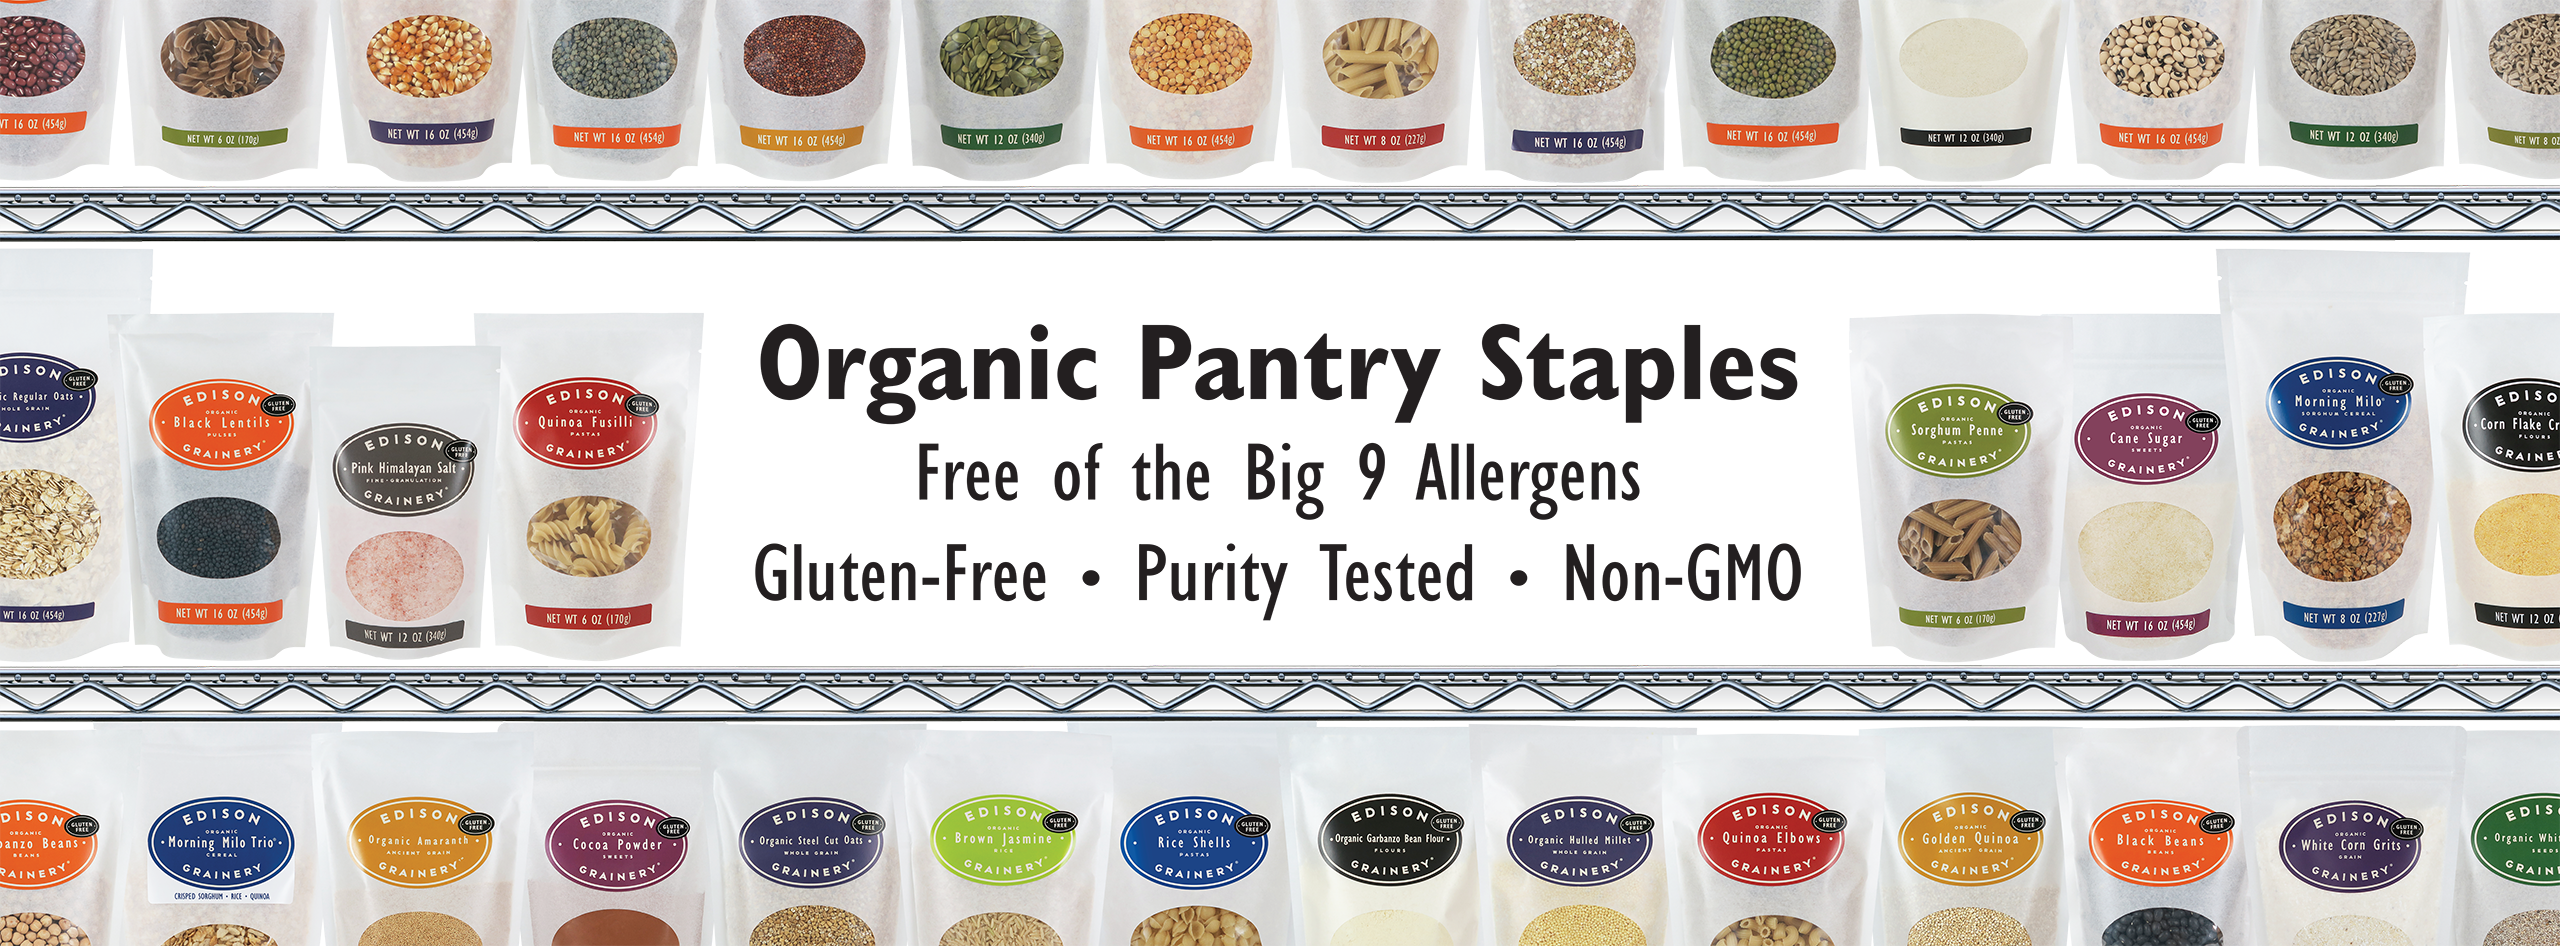 A wide angle photo of EDISON GRAINERY products lined up on a grocery shelf. In an open space at the center of the image are the words: "Organic Pantry Staples - Free of the Big 9 Allergens - Gluten-Free - Purity Tested - Non-GOM".